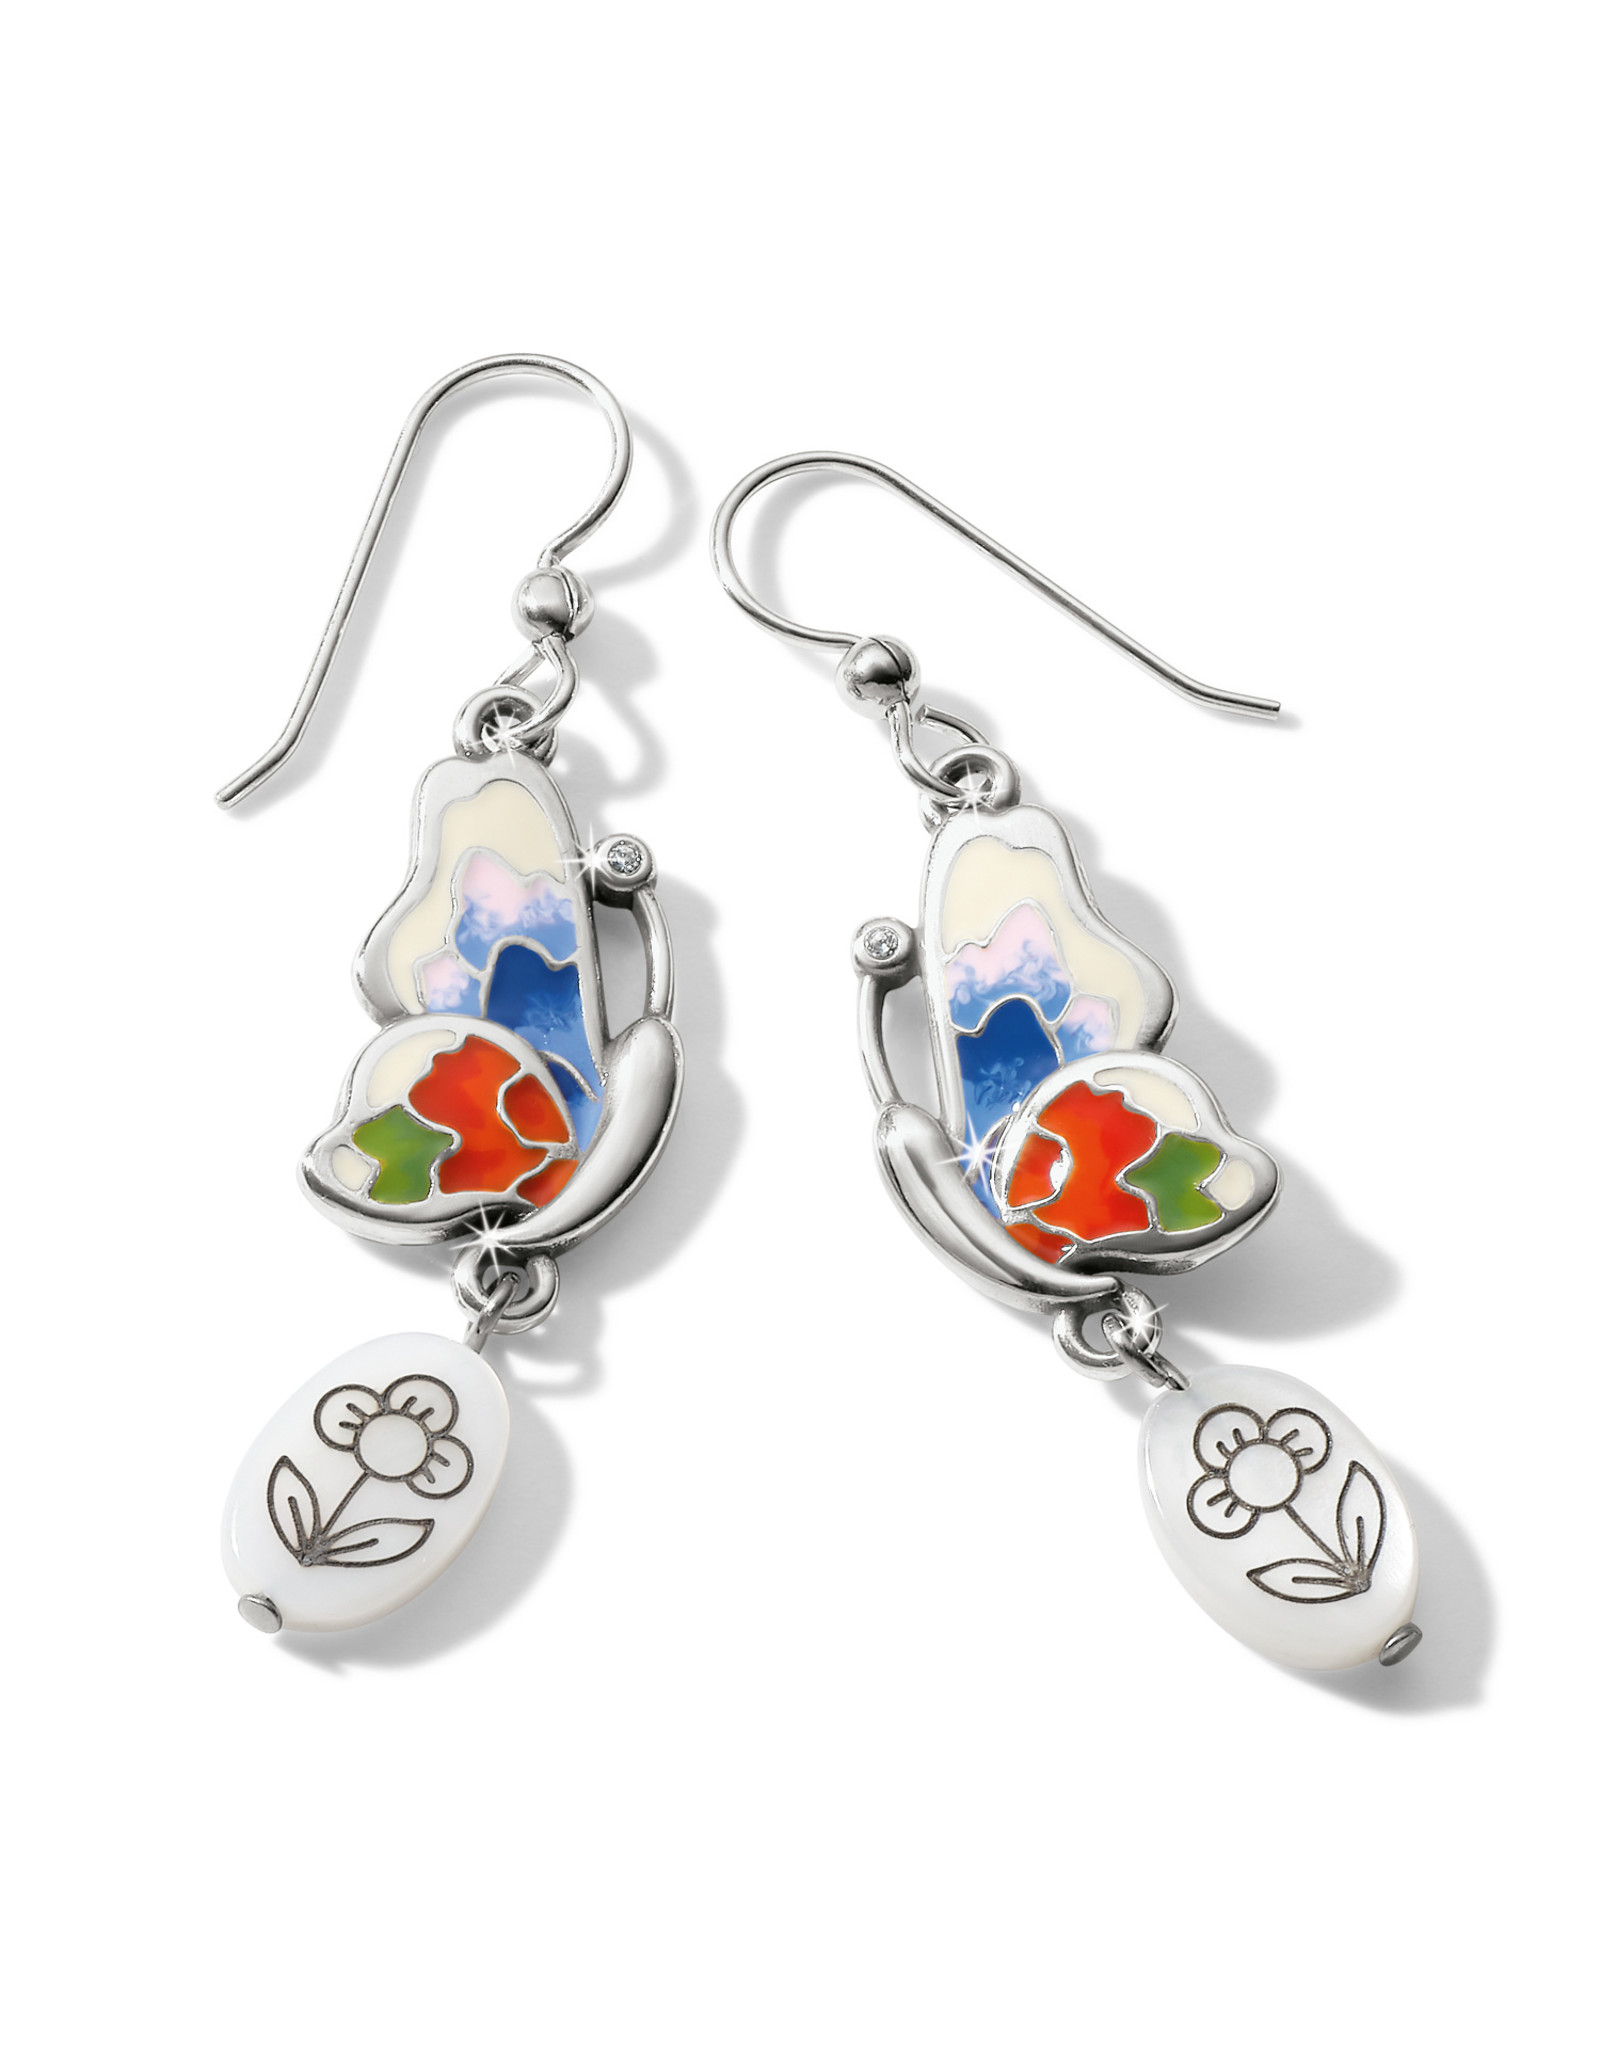 Brighton Brighton JA8803 Blossom Hill Butterfly Shell French Wire Earrings